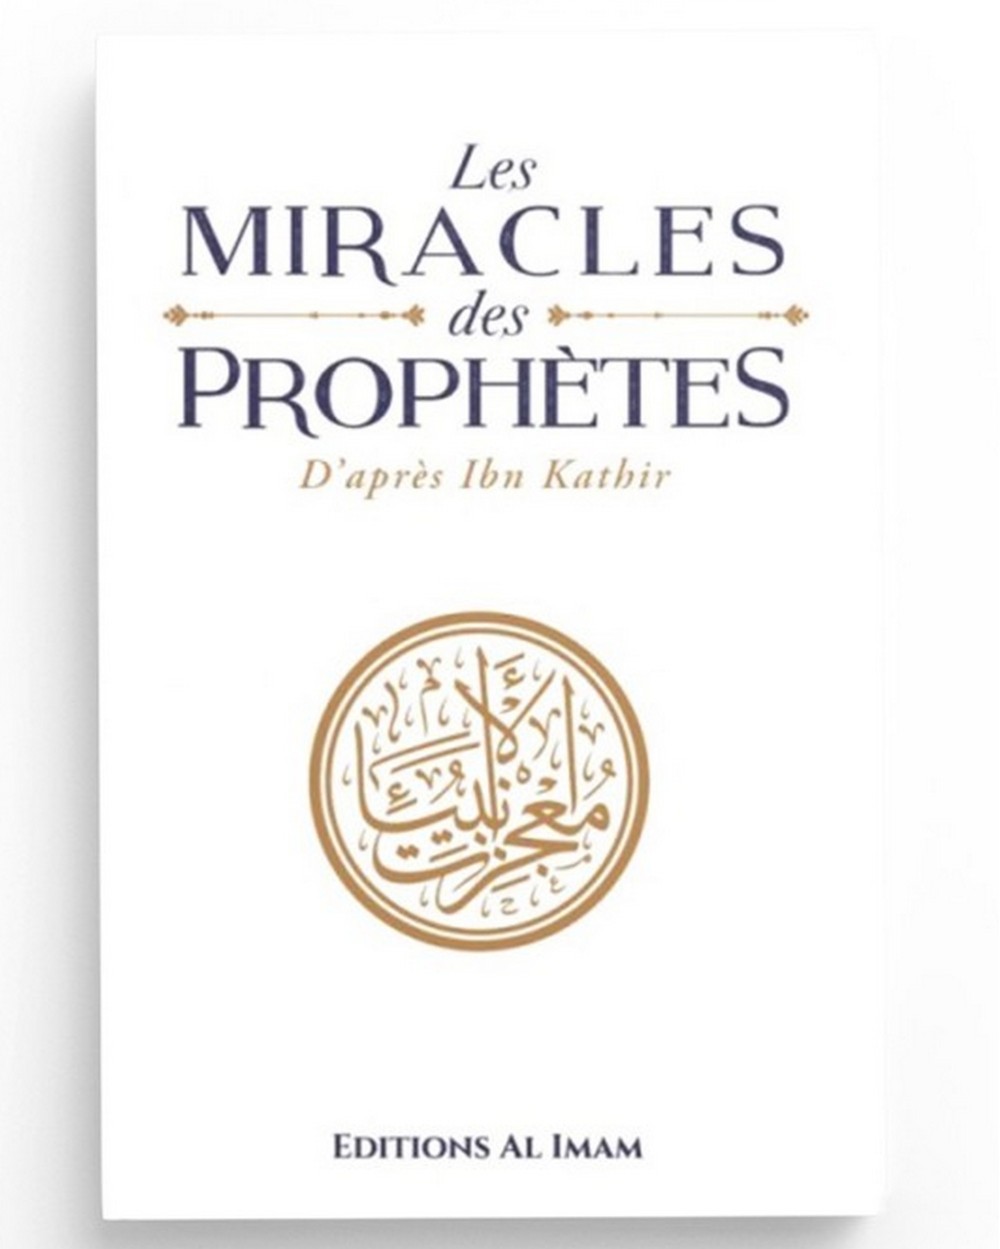 The Miracles of the Prophets According to Ibn Kathir - Edition Al Imam